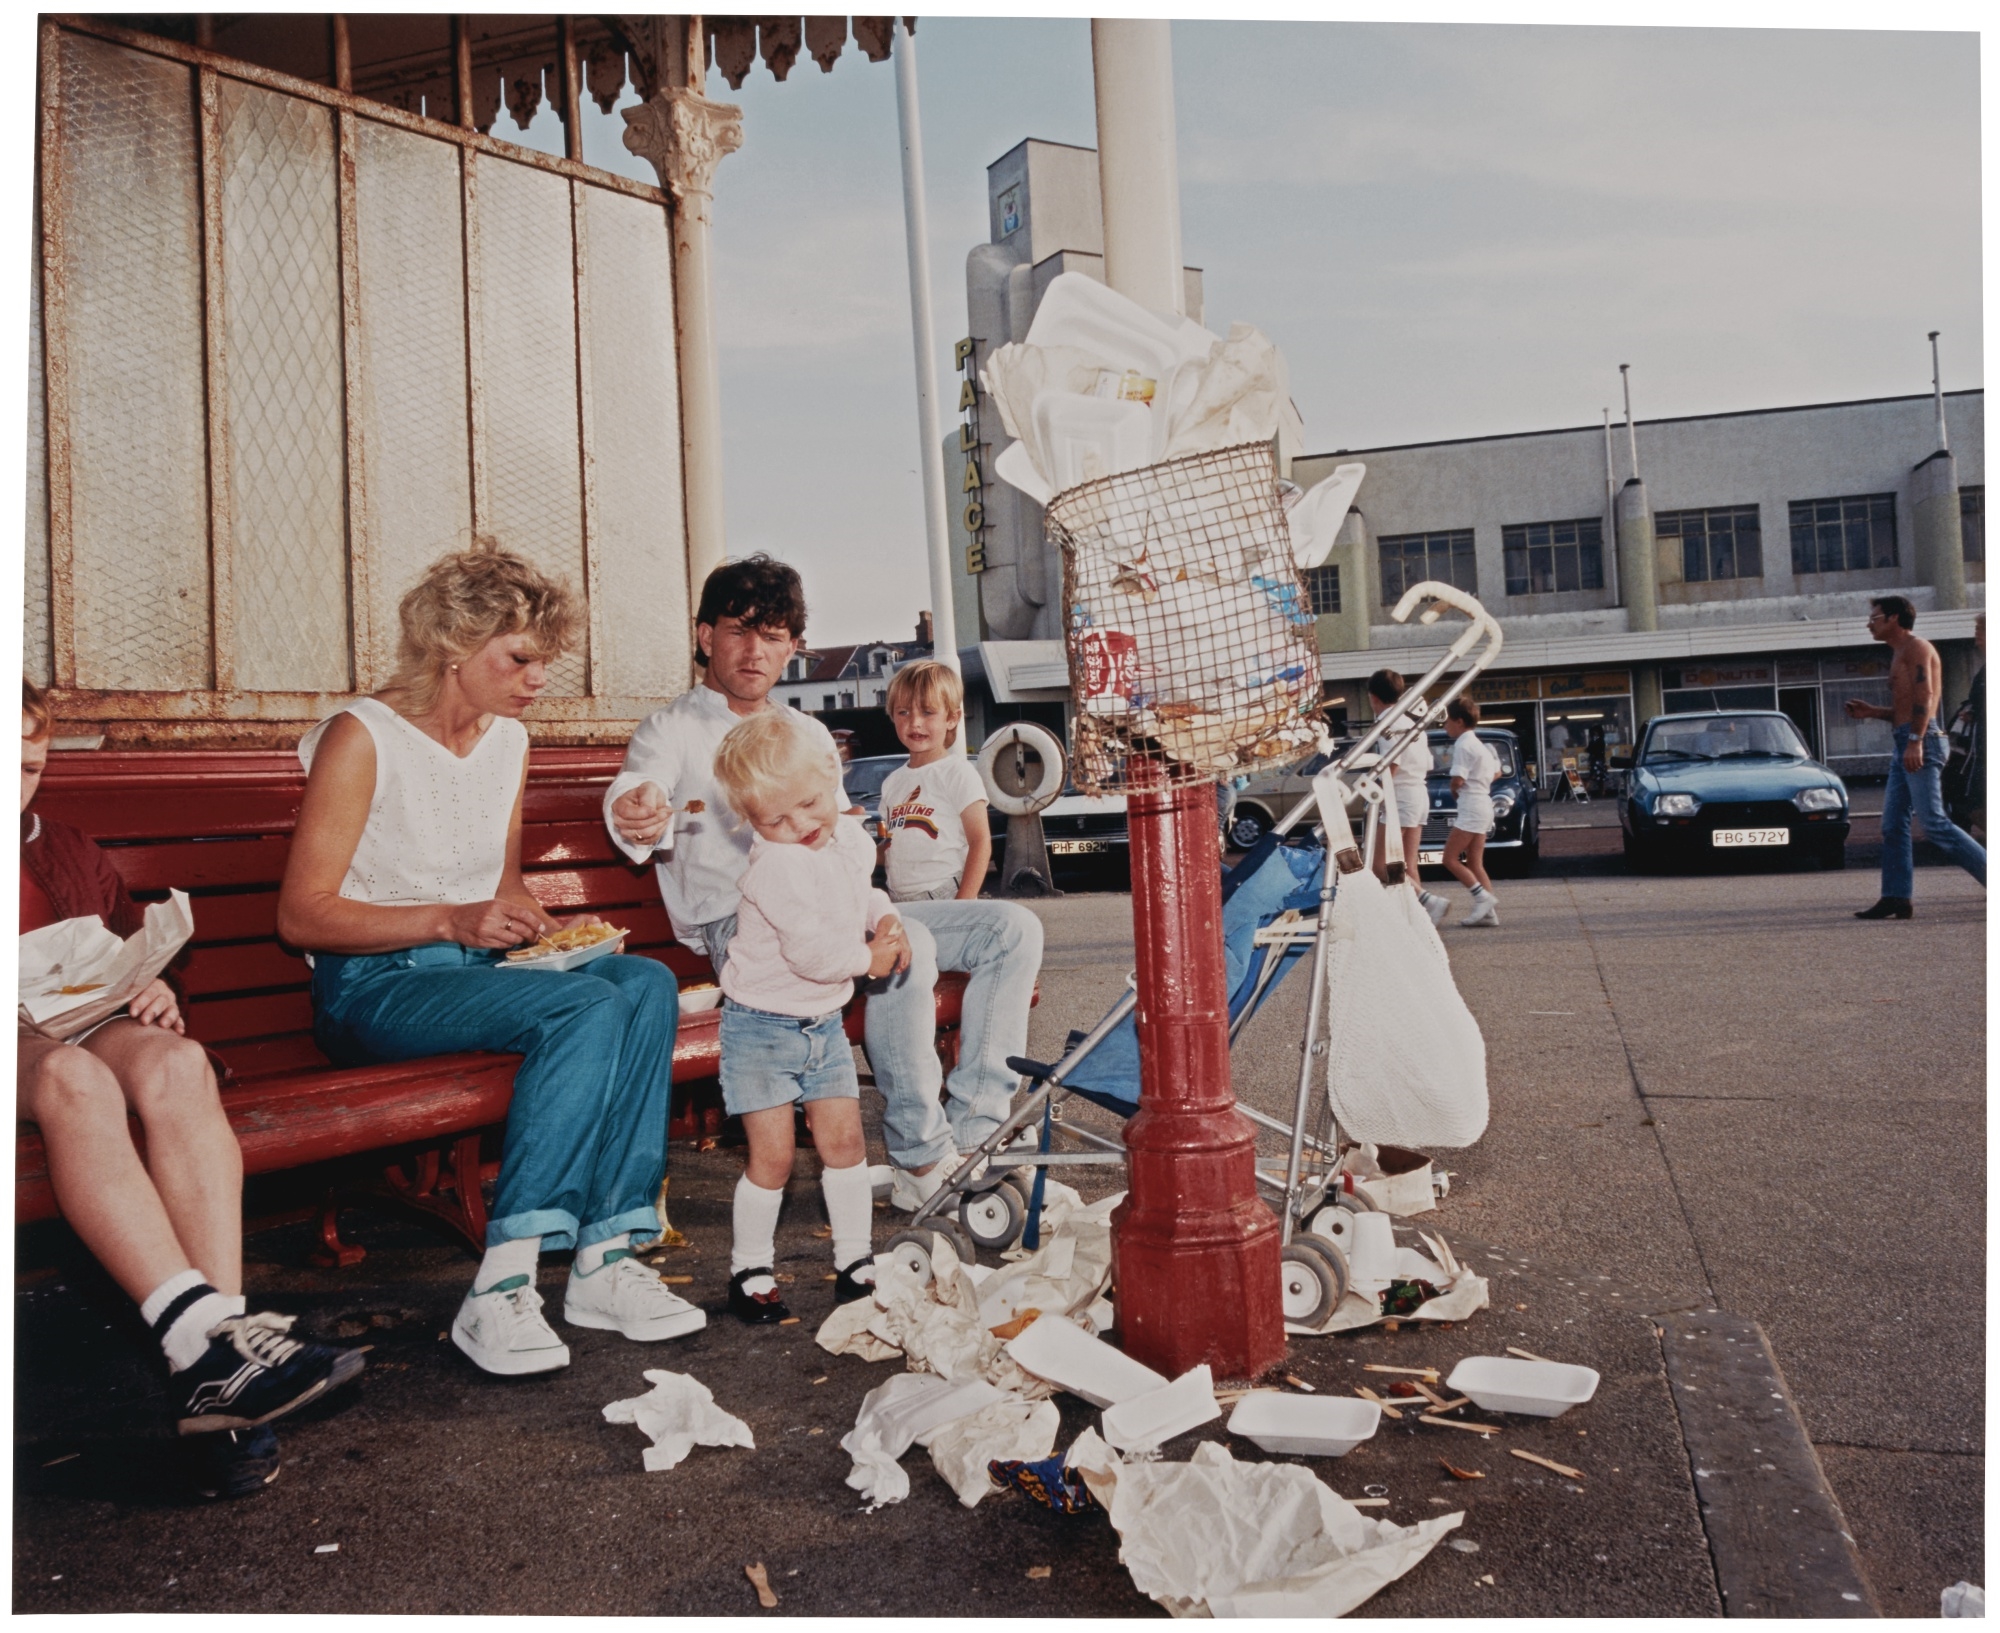 Artwork by Martin Parr, NEW BRIGHTON, FROM 'THE LAST RESORT', Made of Chromogenic prints